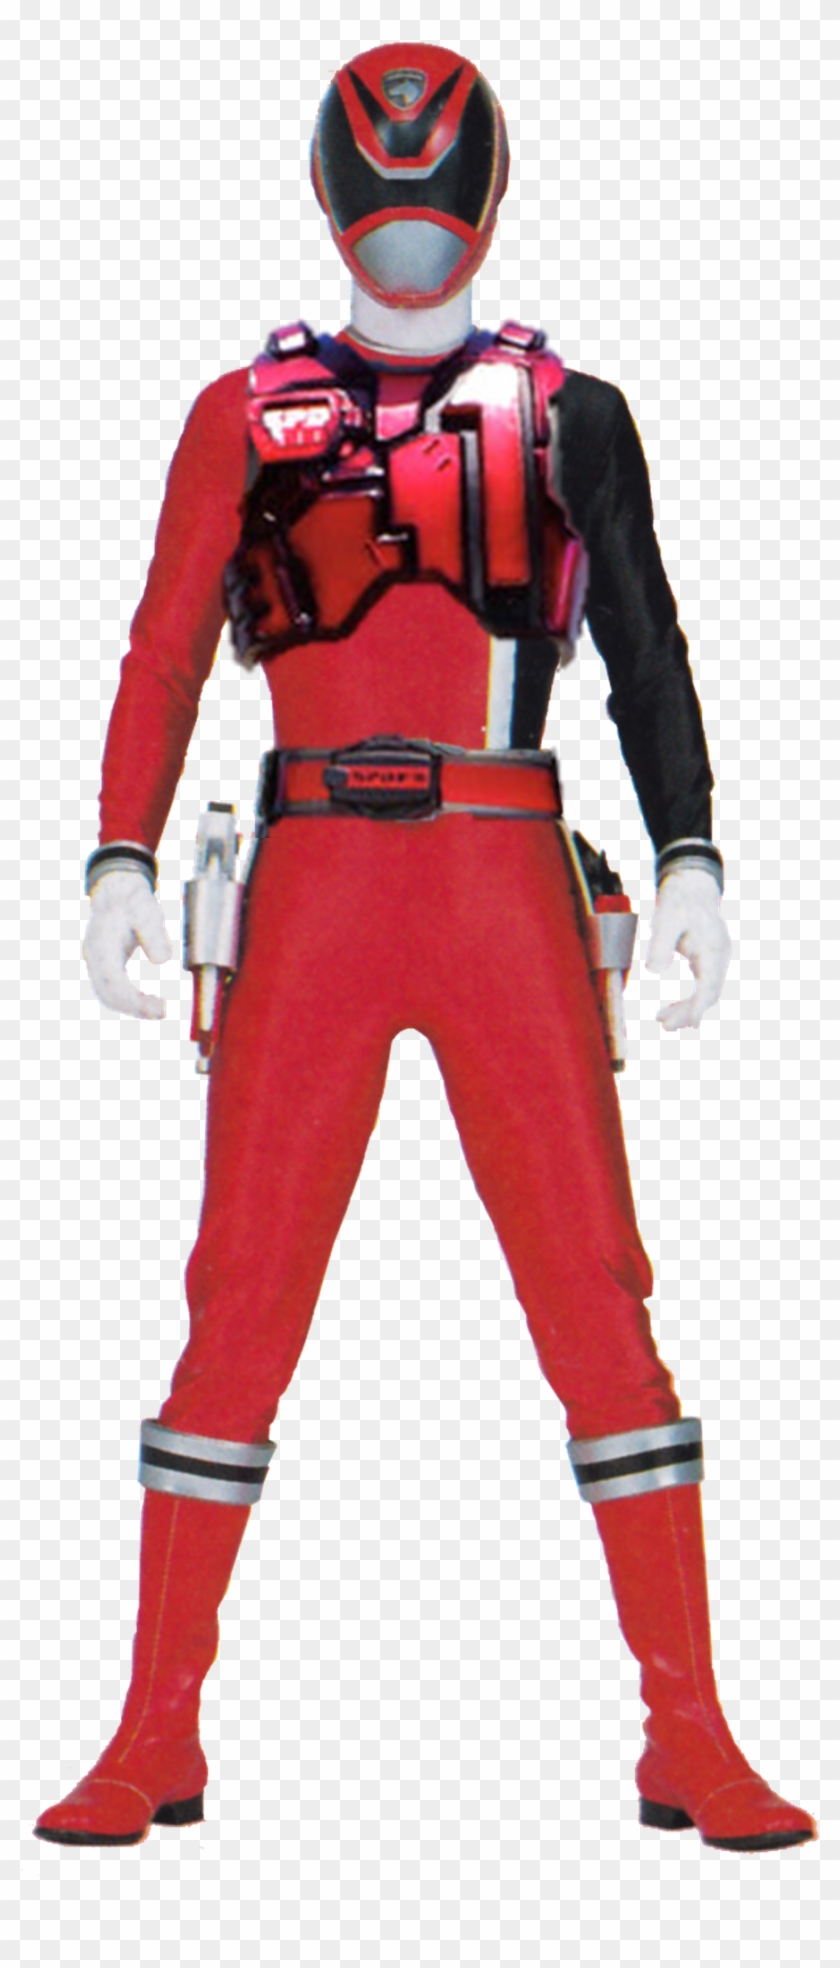 Of Employment In The Fire Squad, Ban Was Given An Upgrade - Power Rangers Spd Red Ranger #539957